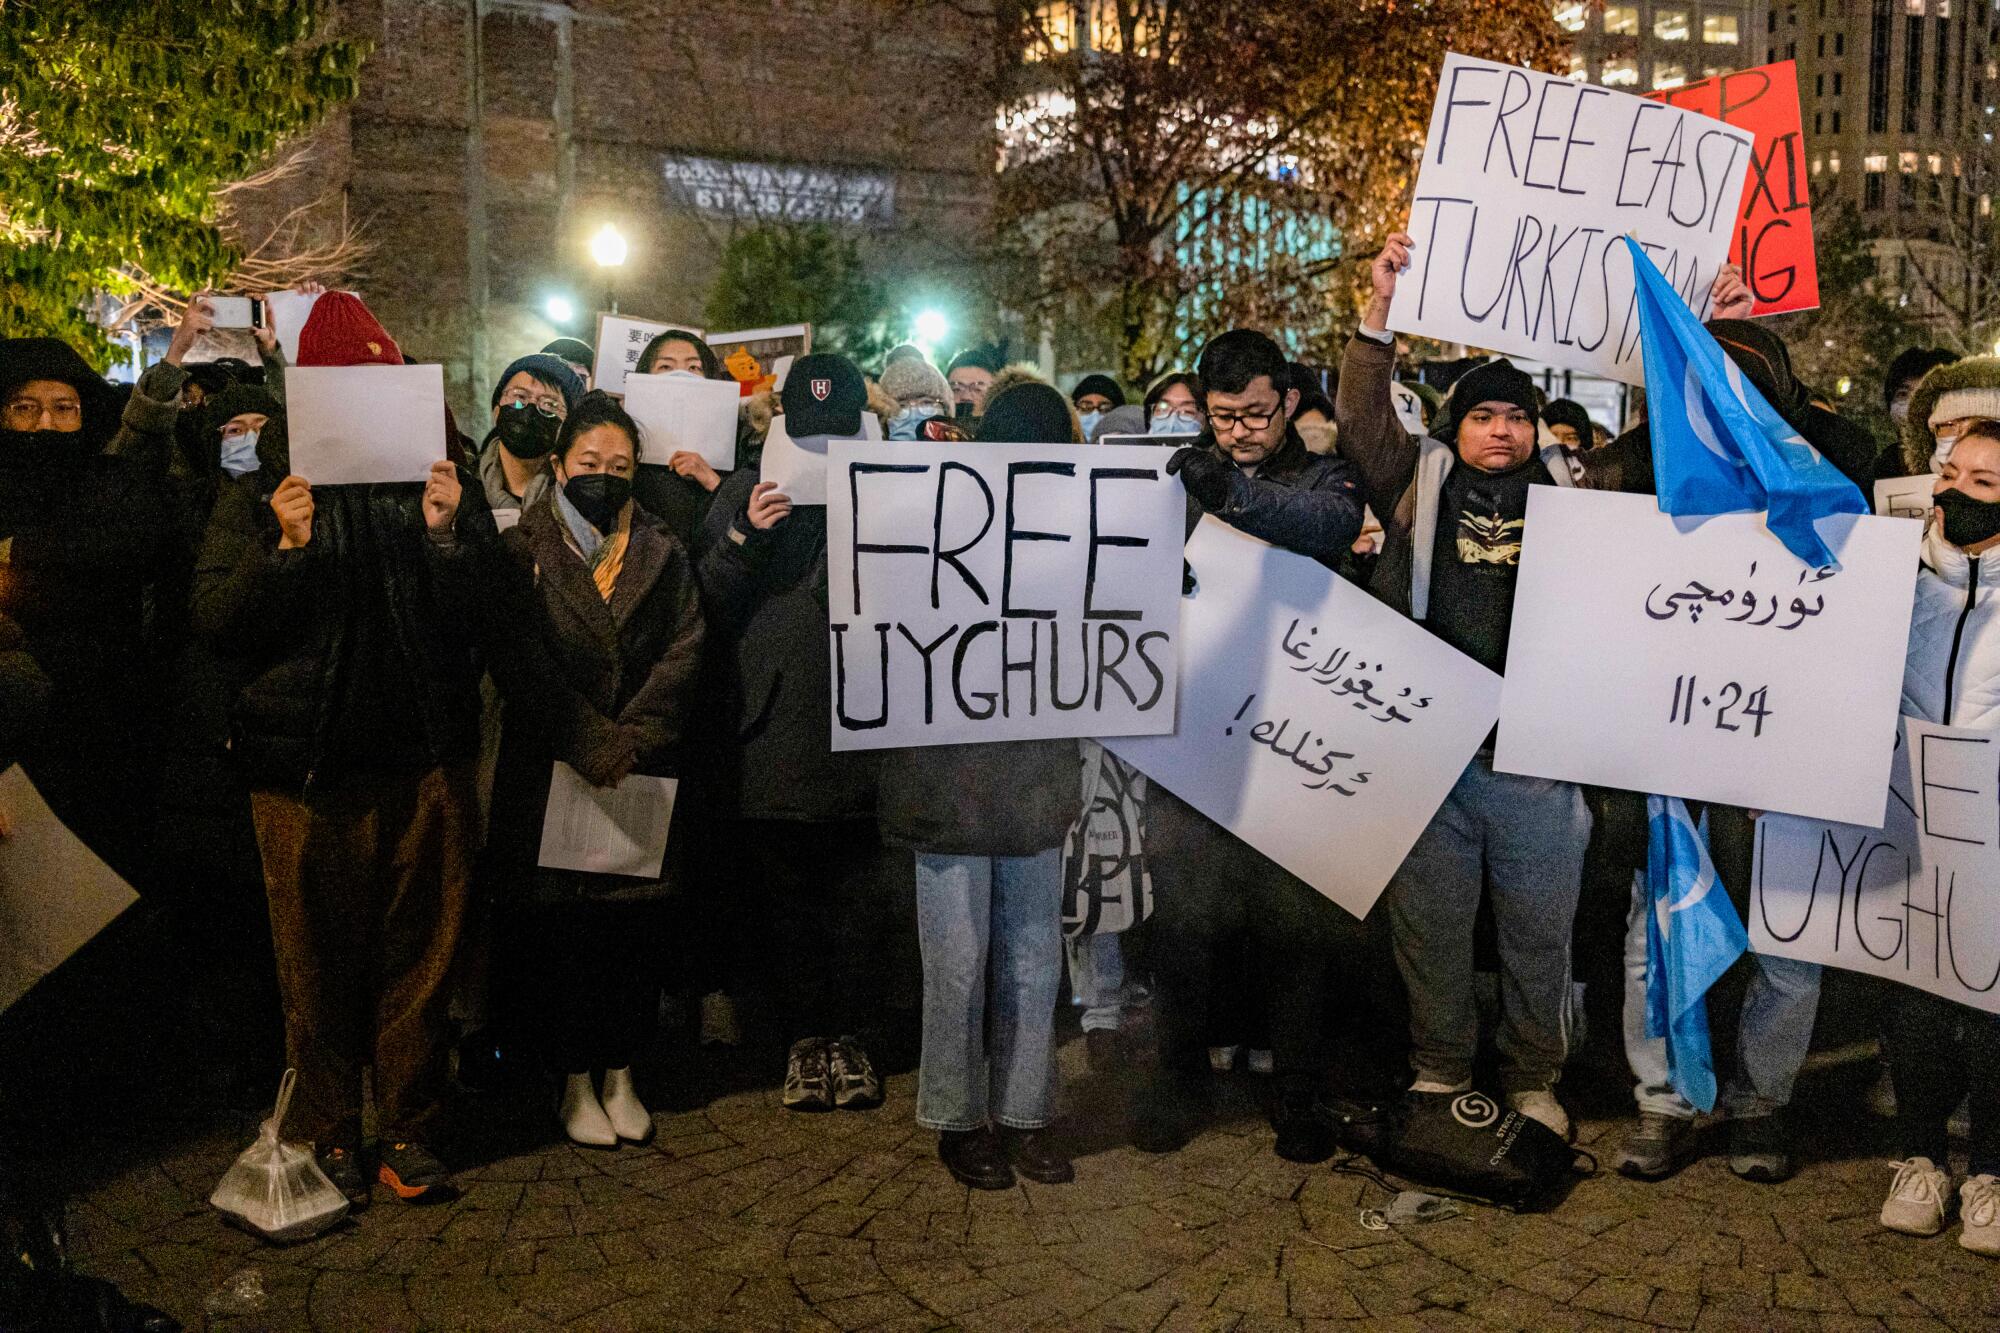 Demonstrators hold placards that read "Free Uyghurs" and "Free Turkistan" during a protest in Boston.